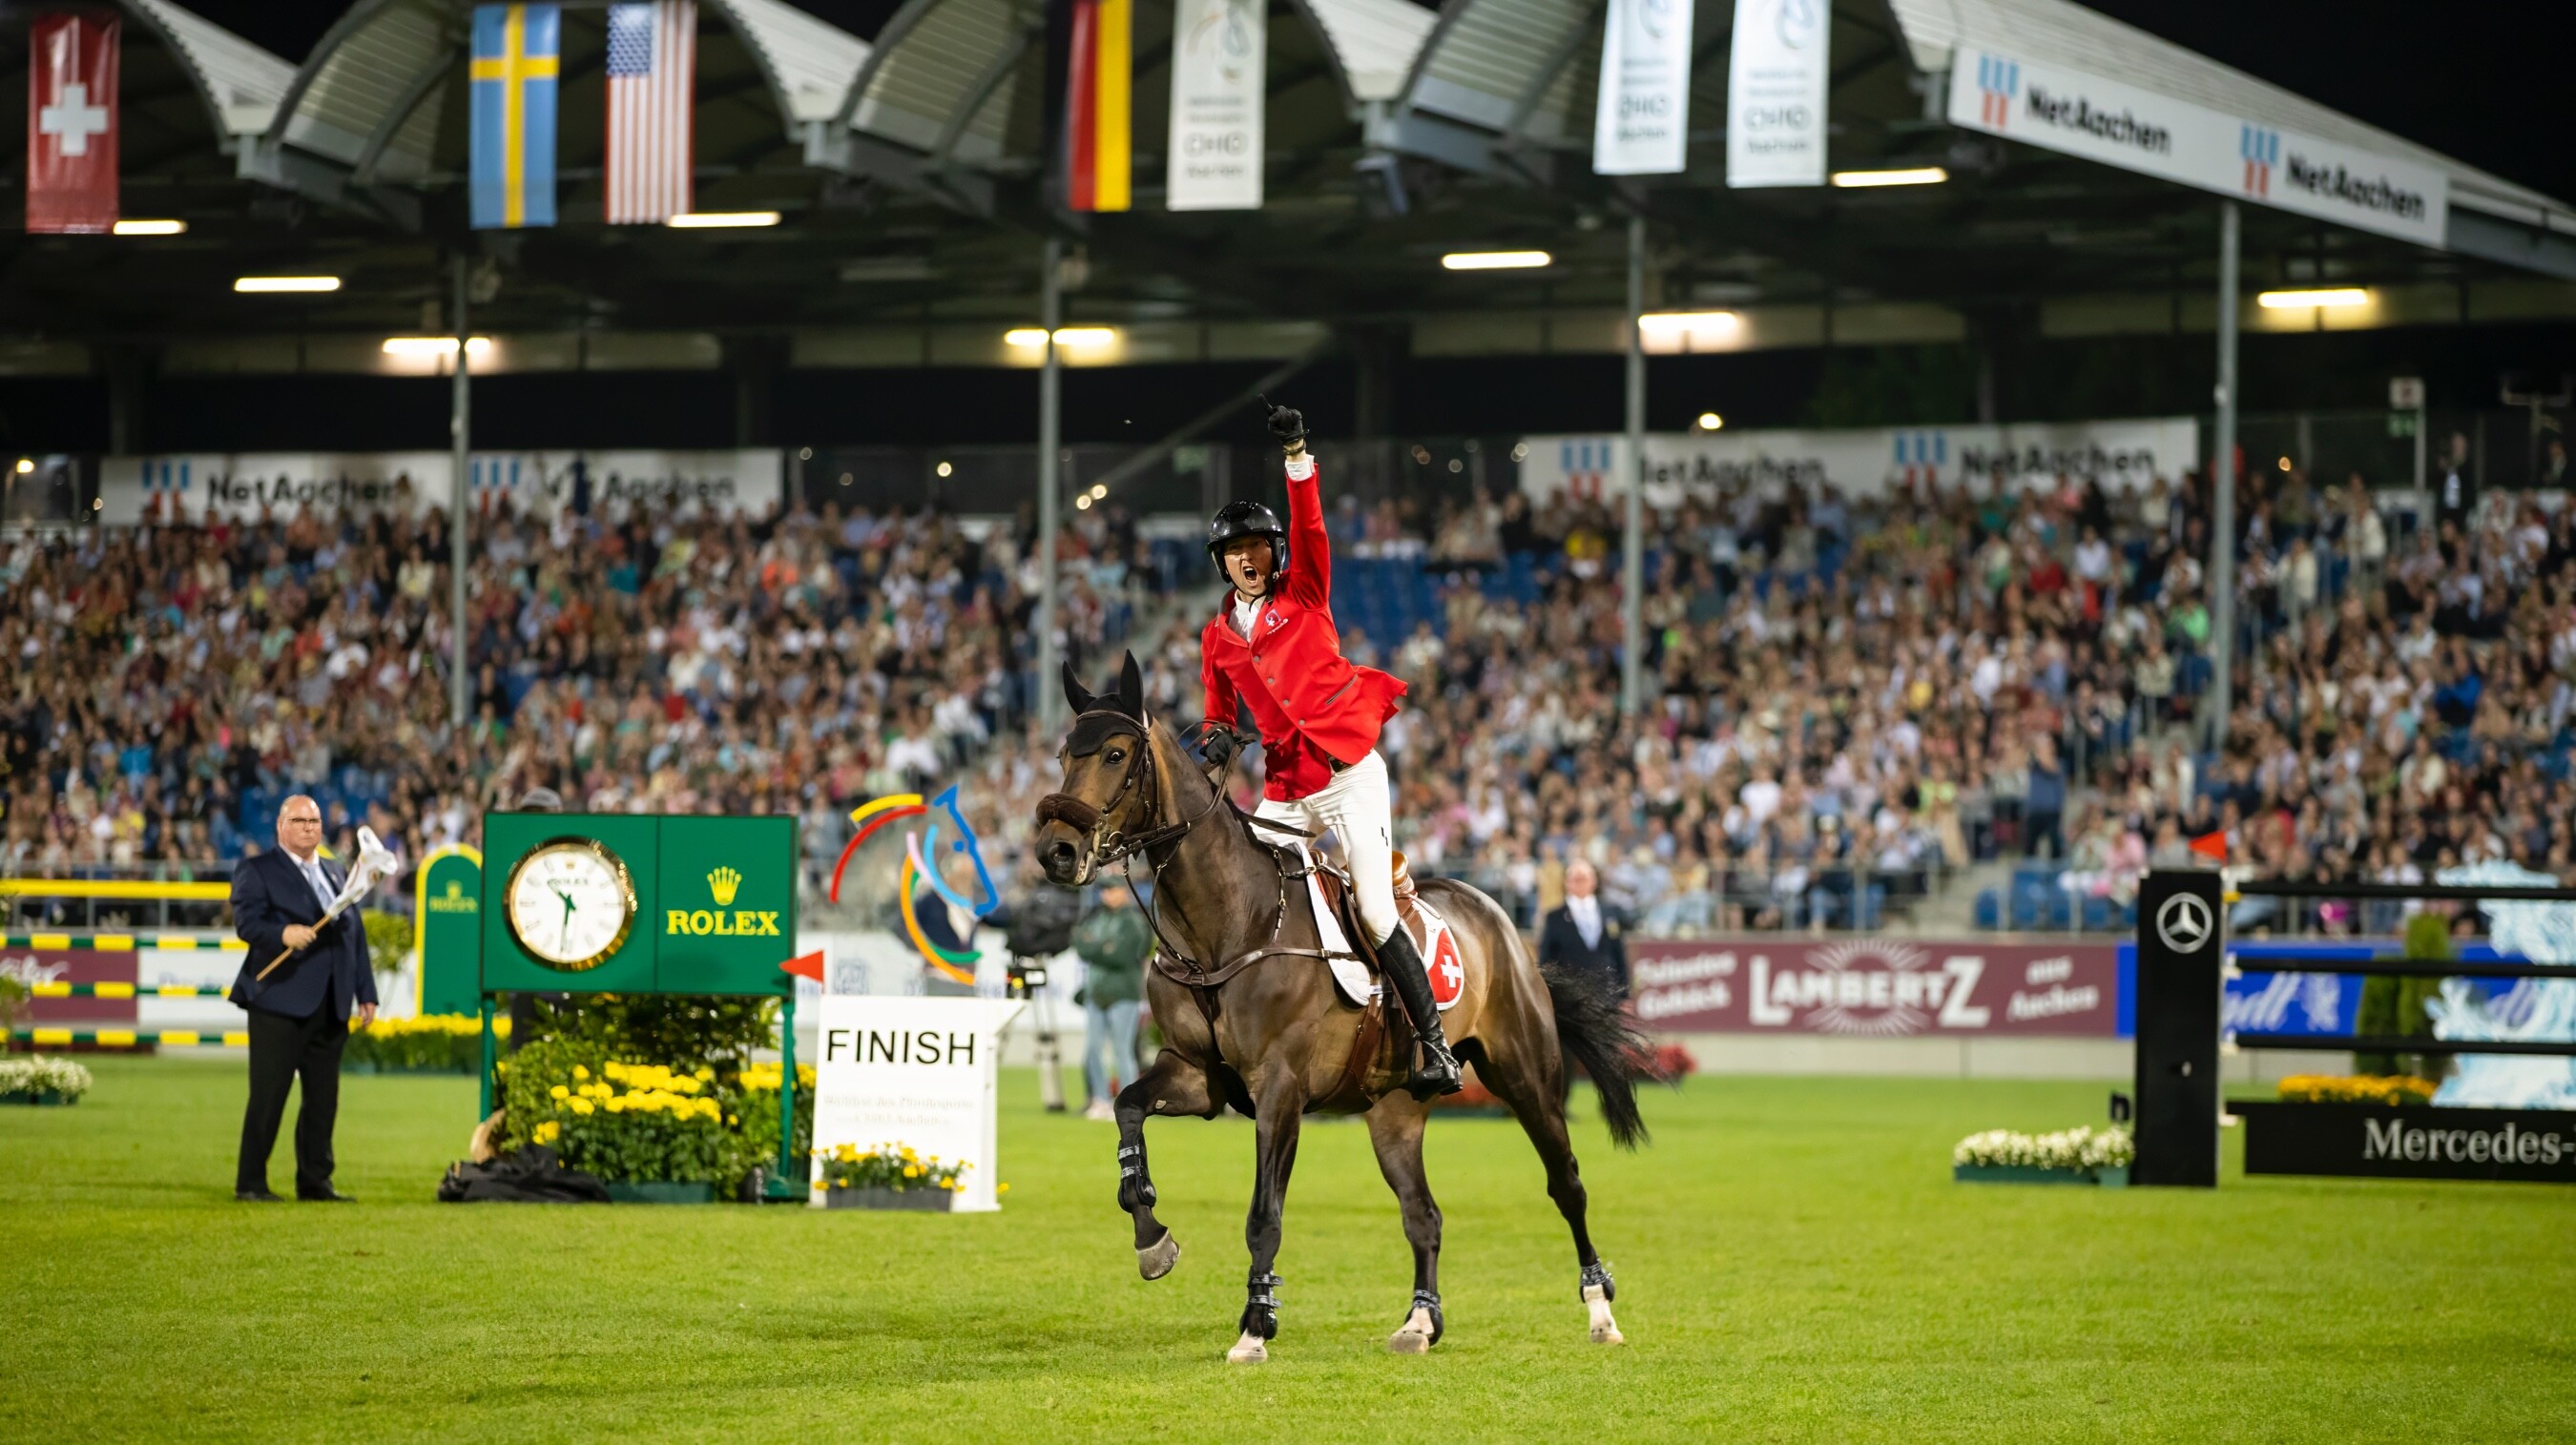 Rolex Grand Slam of Show Jumping | Euro-Asia